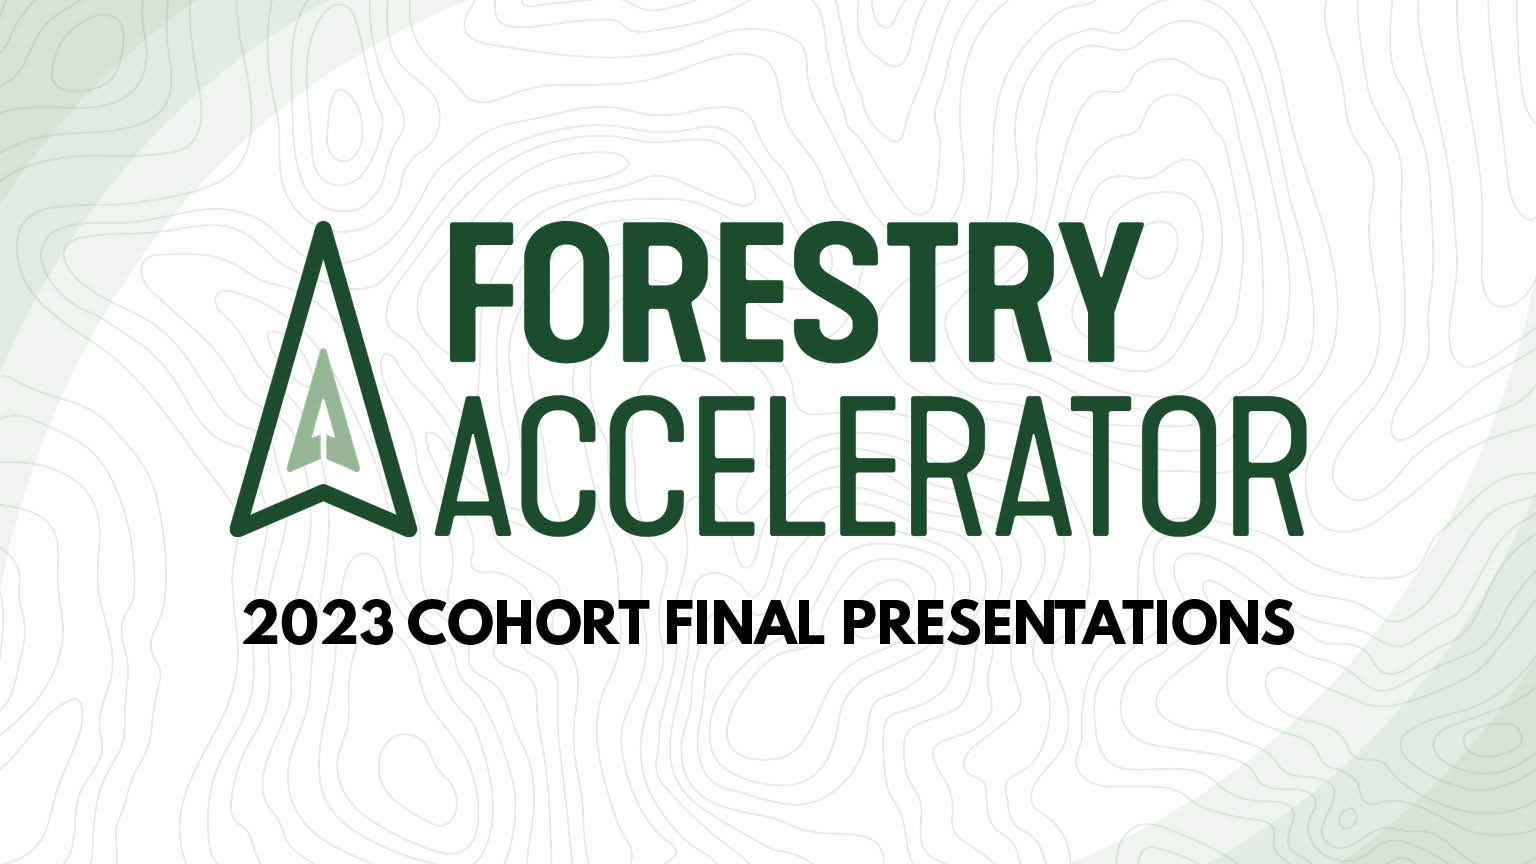 Forestry Accelerator Final Presentations